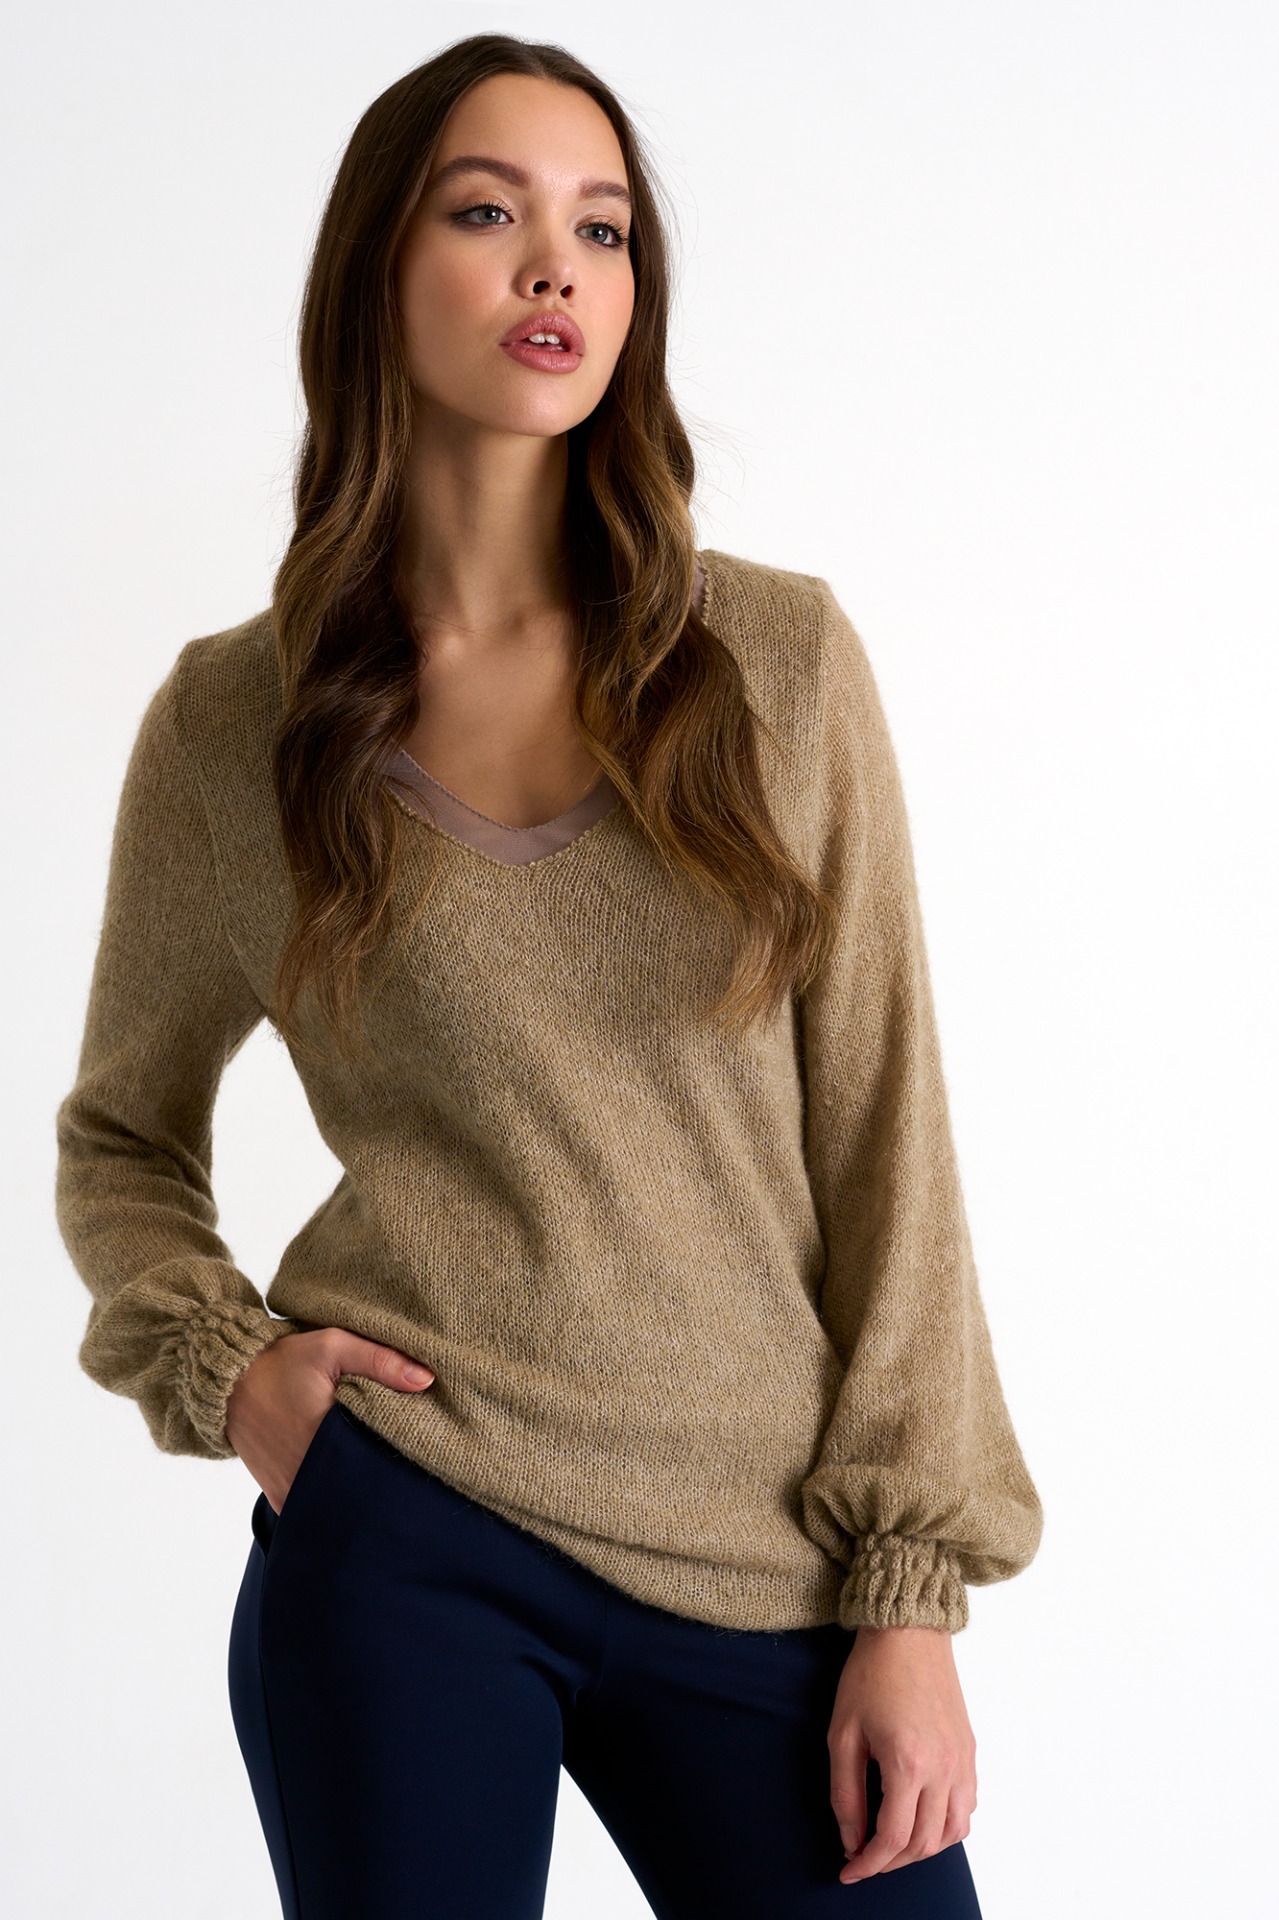 Lucky Brand Women's Light Brown V-Neck Oversized Pullover Sweater Size M  Tan Size M - $28 - From Jessica